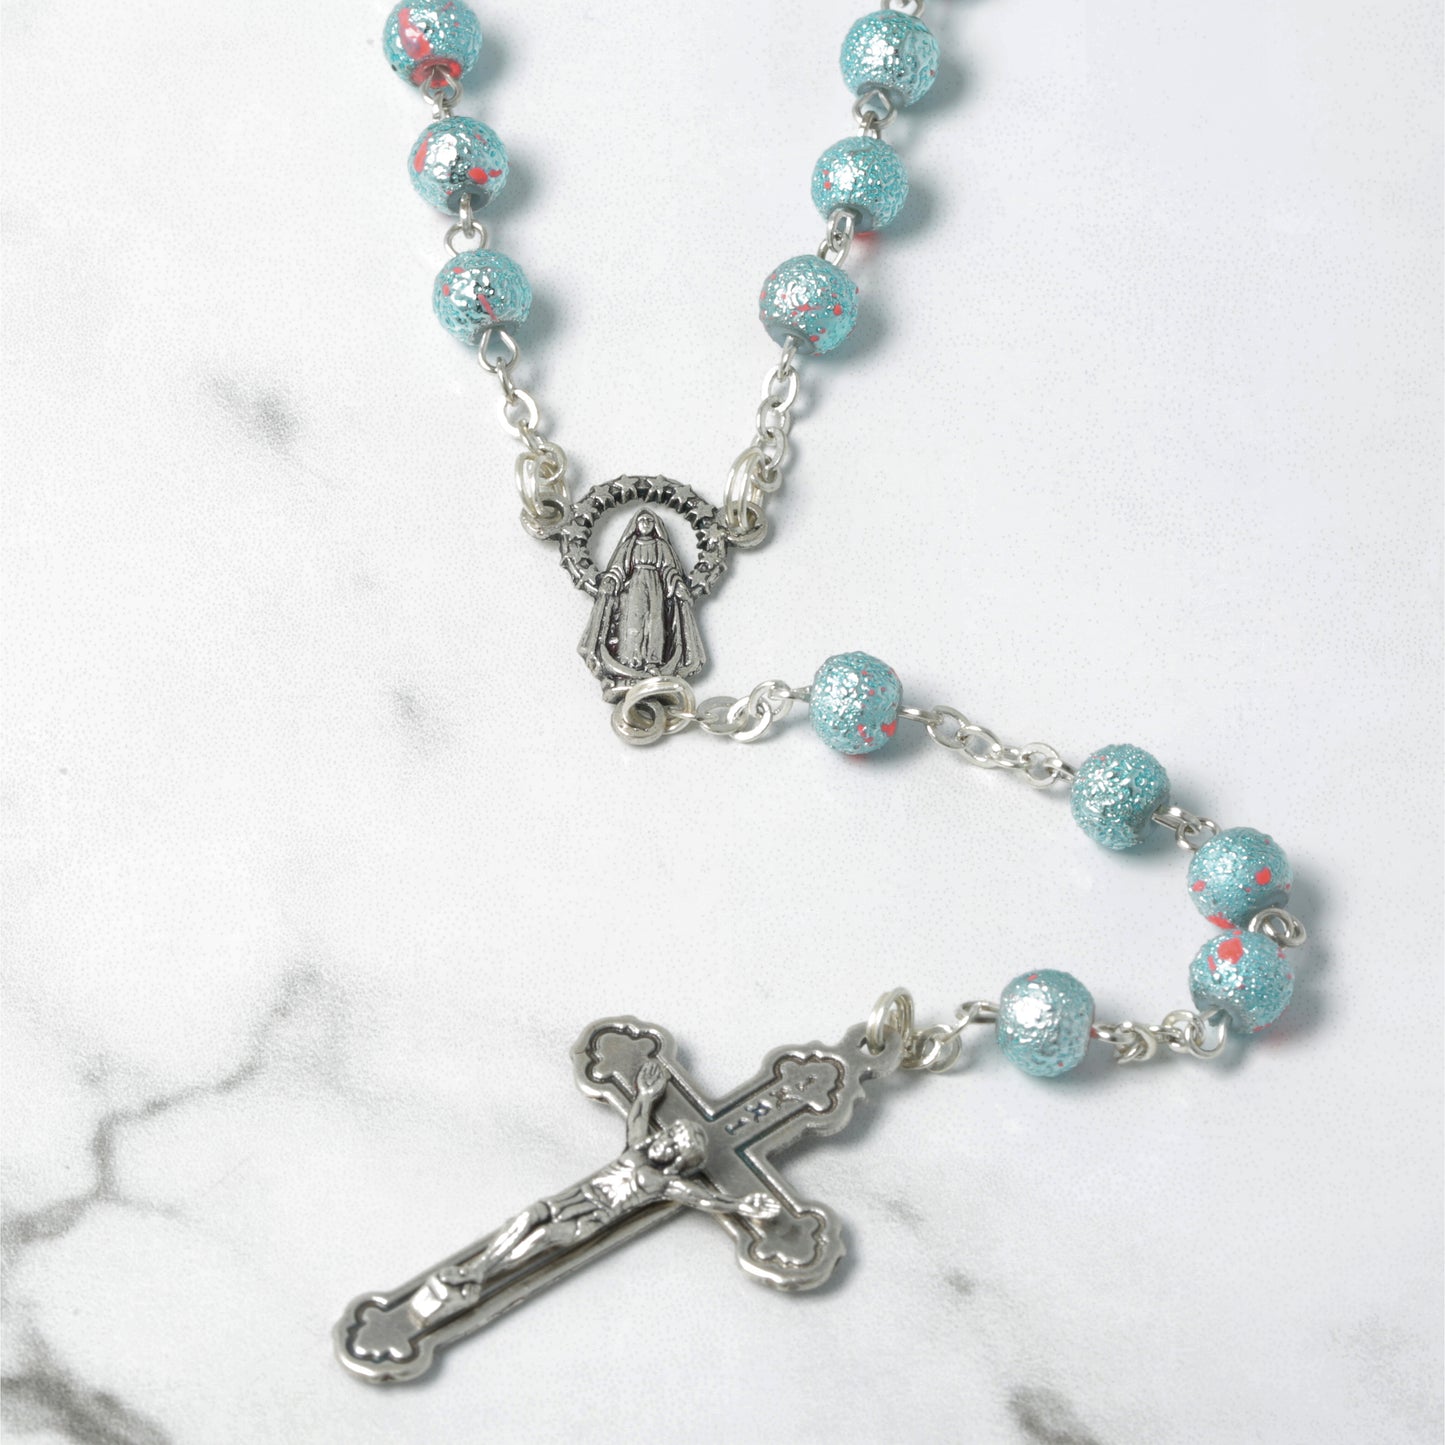 Light Blue Plastic Rosary Souvenirs from Italy